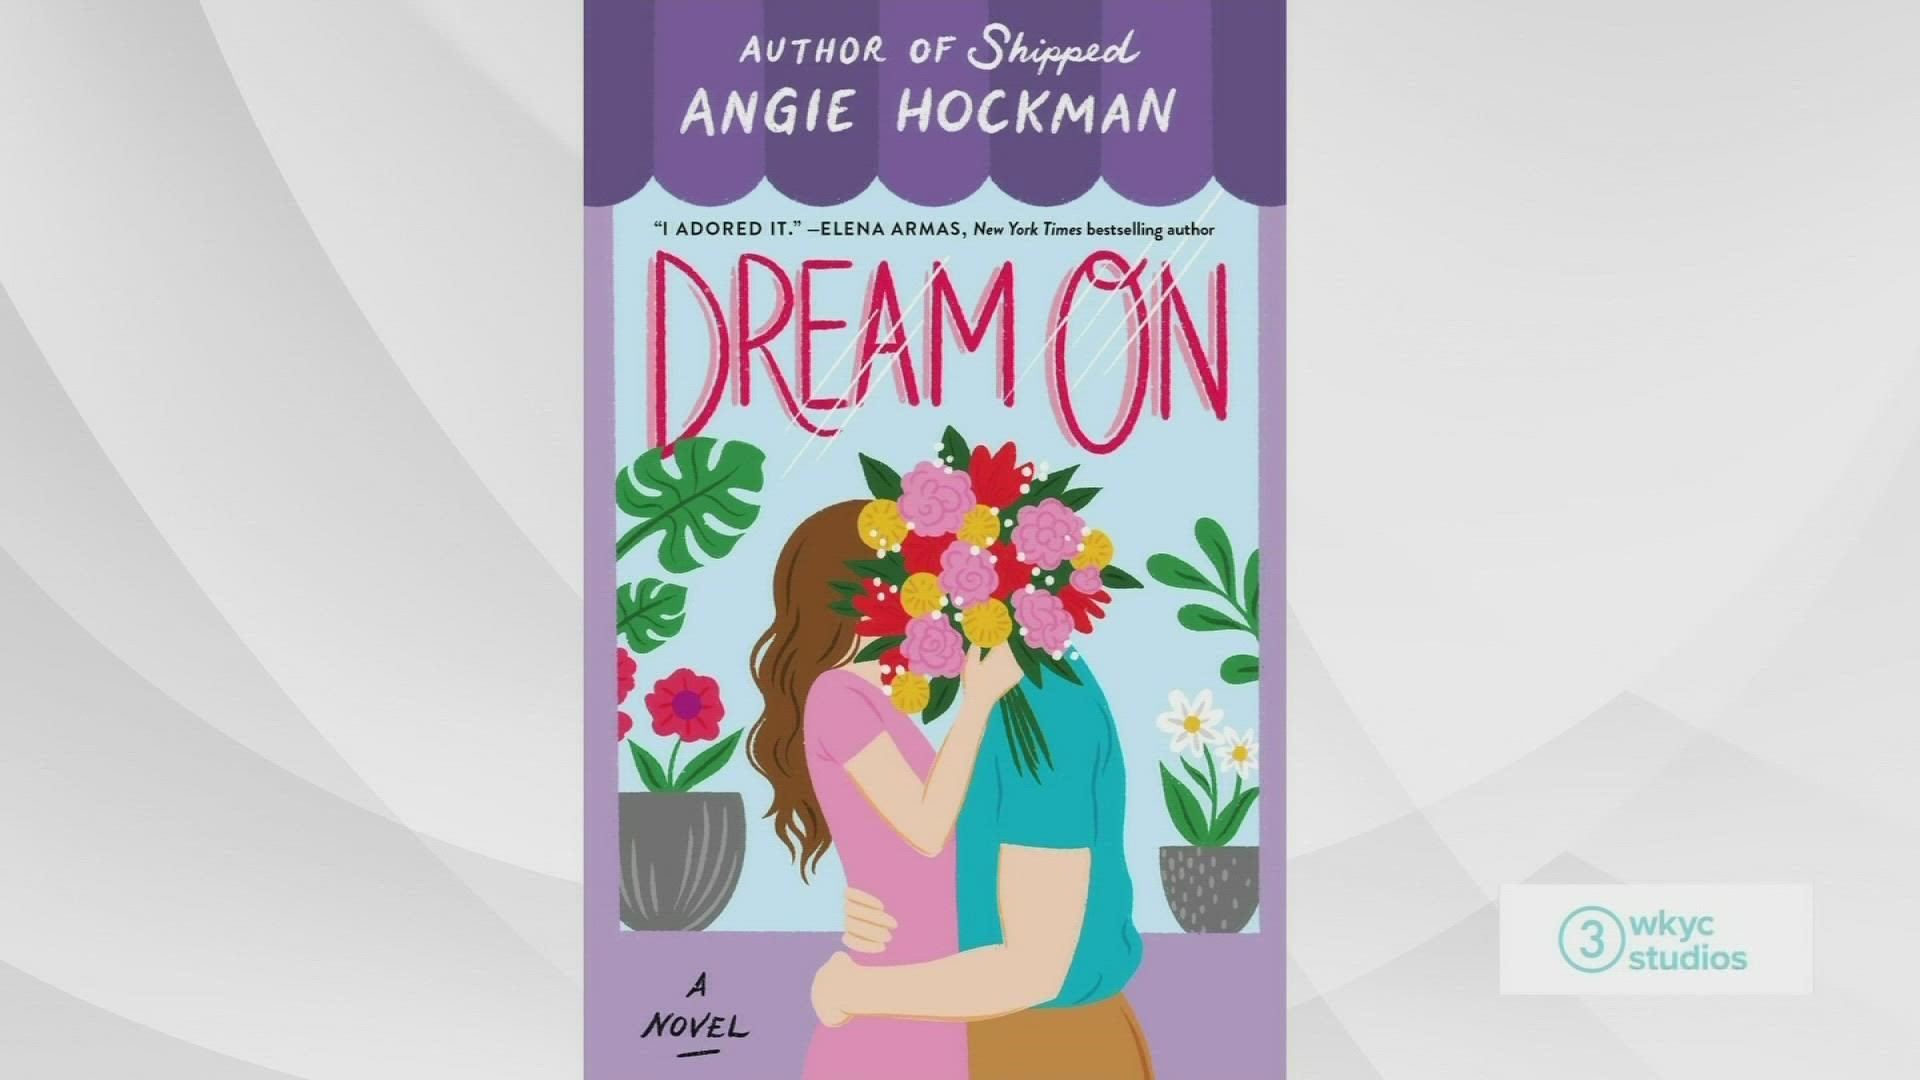 It's a special edition of our Good Company Book Club! Hollie talks with Angie Hockman, the author of "Dream On," about her book.